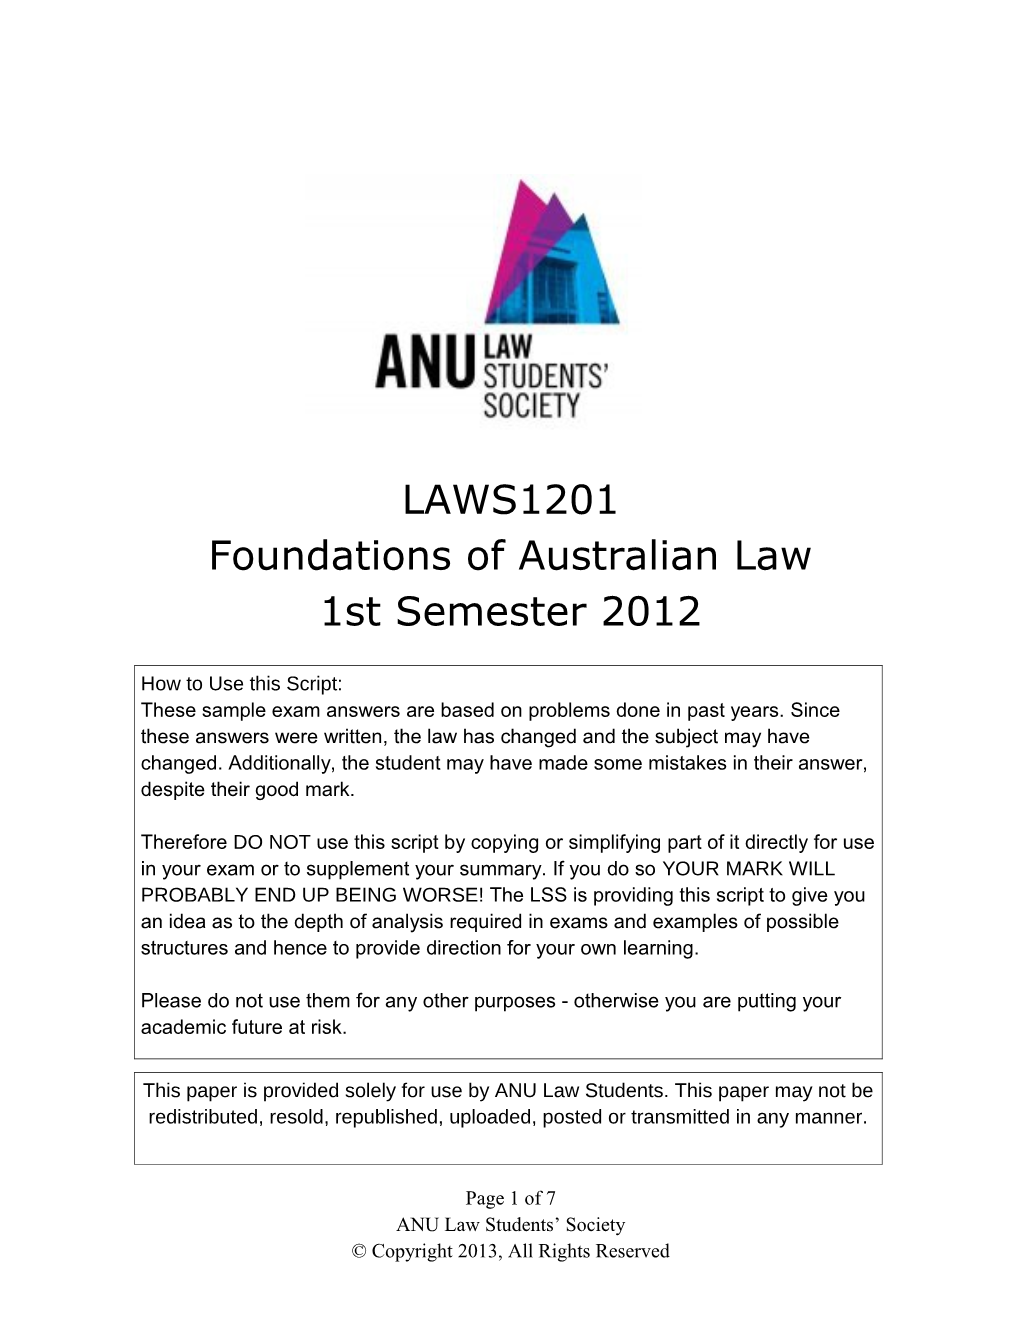 Foundations of Australian Law First Semester 2012